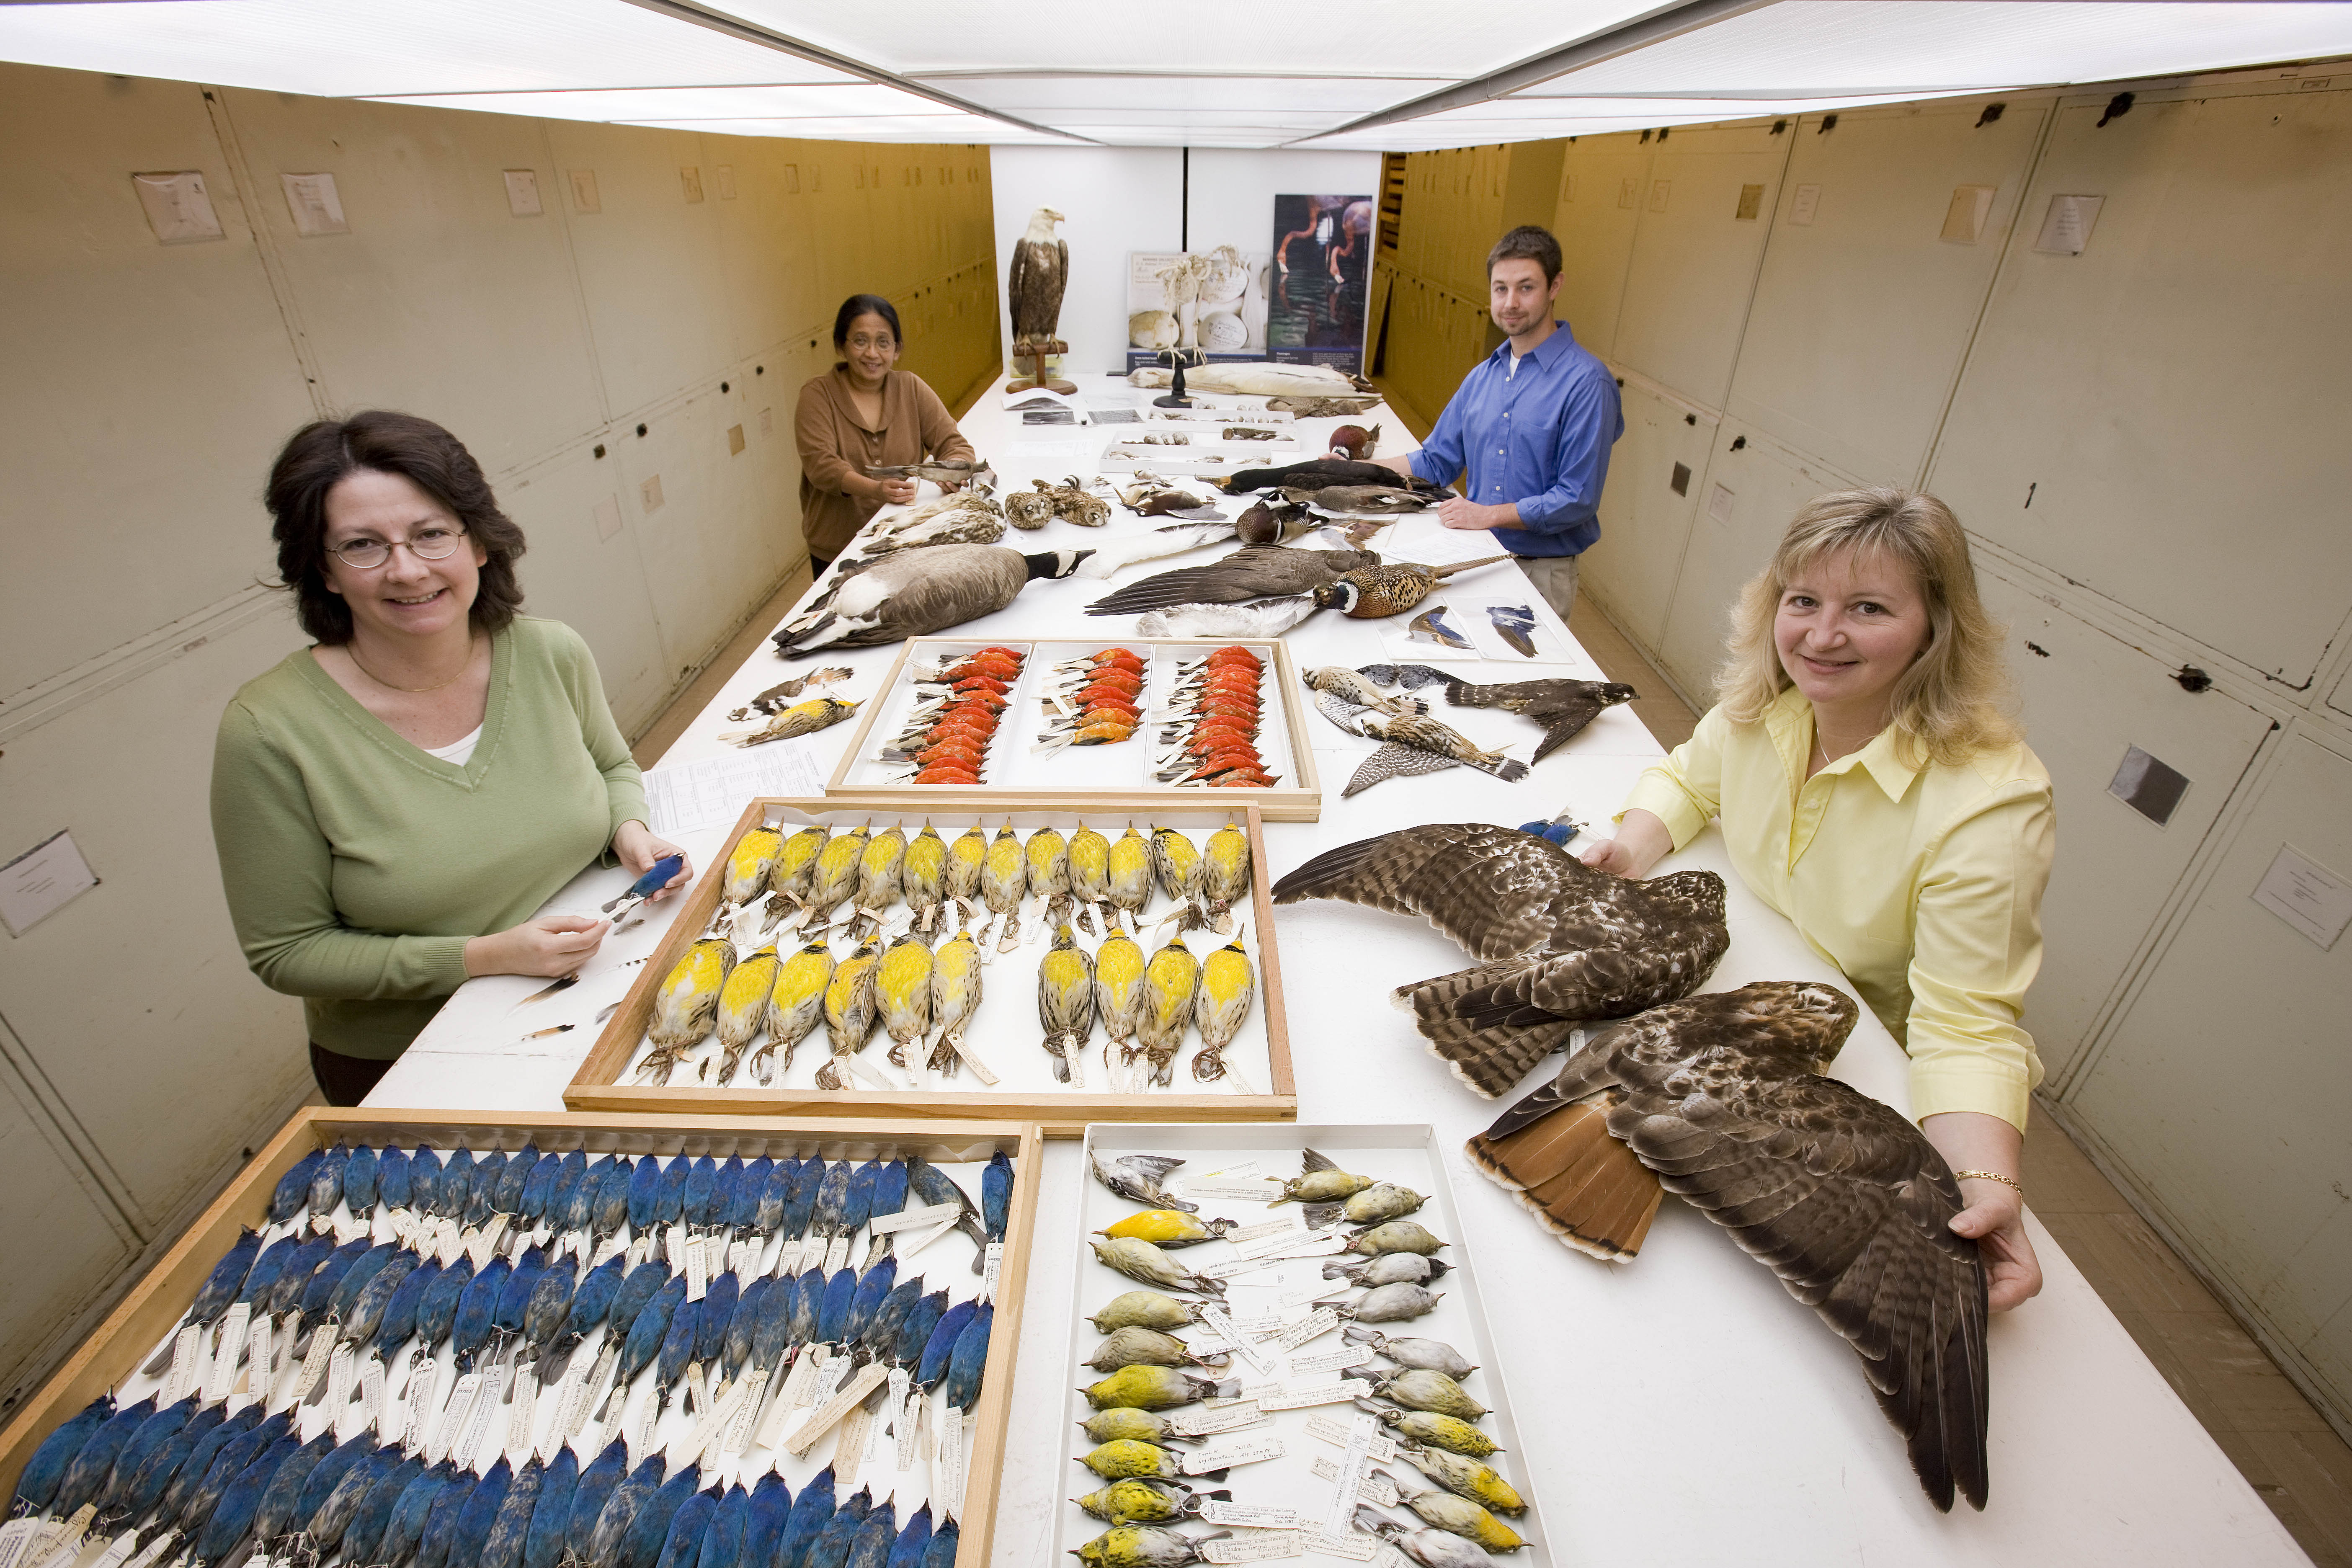 The feather identification team. From left to right: Marcy Heacker, Faridah Dahlan, Jim Whatton and Carla Dove [Image Credit: Chip Clark, Smithsonian Institution]